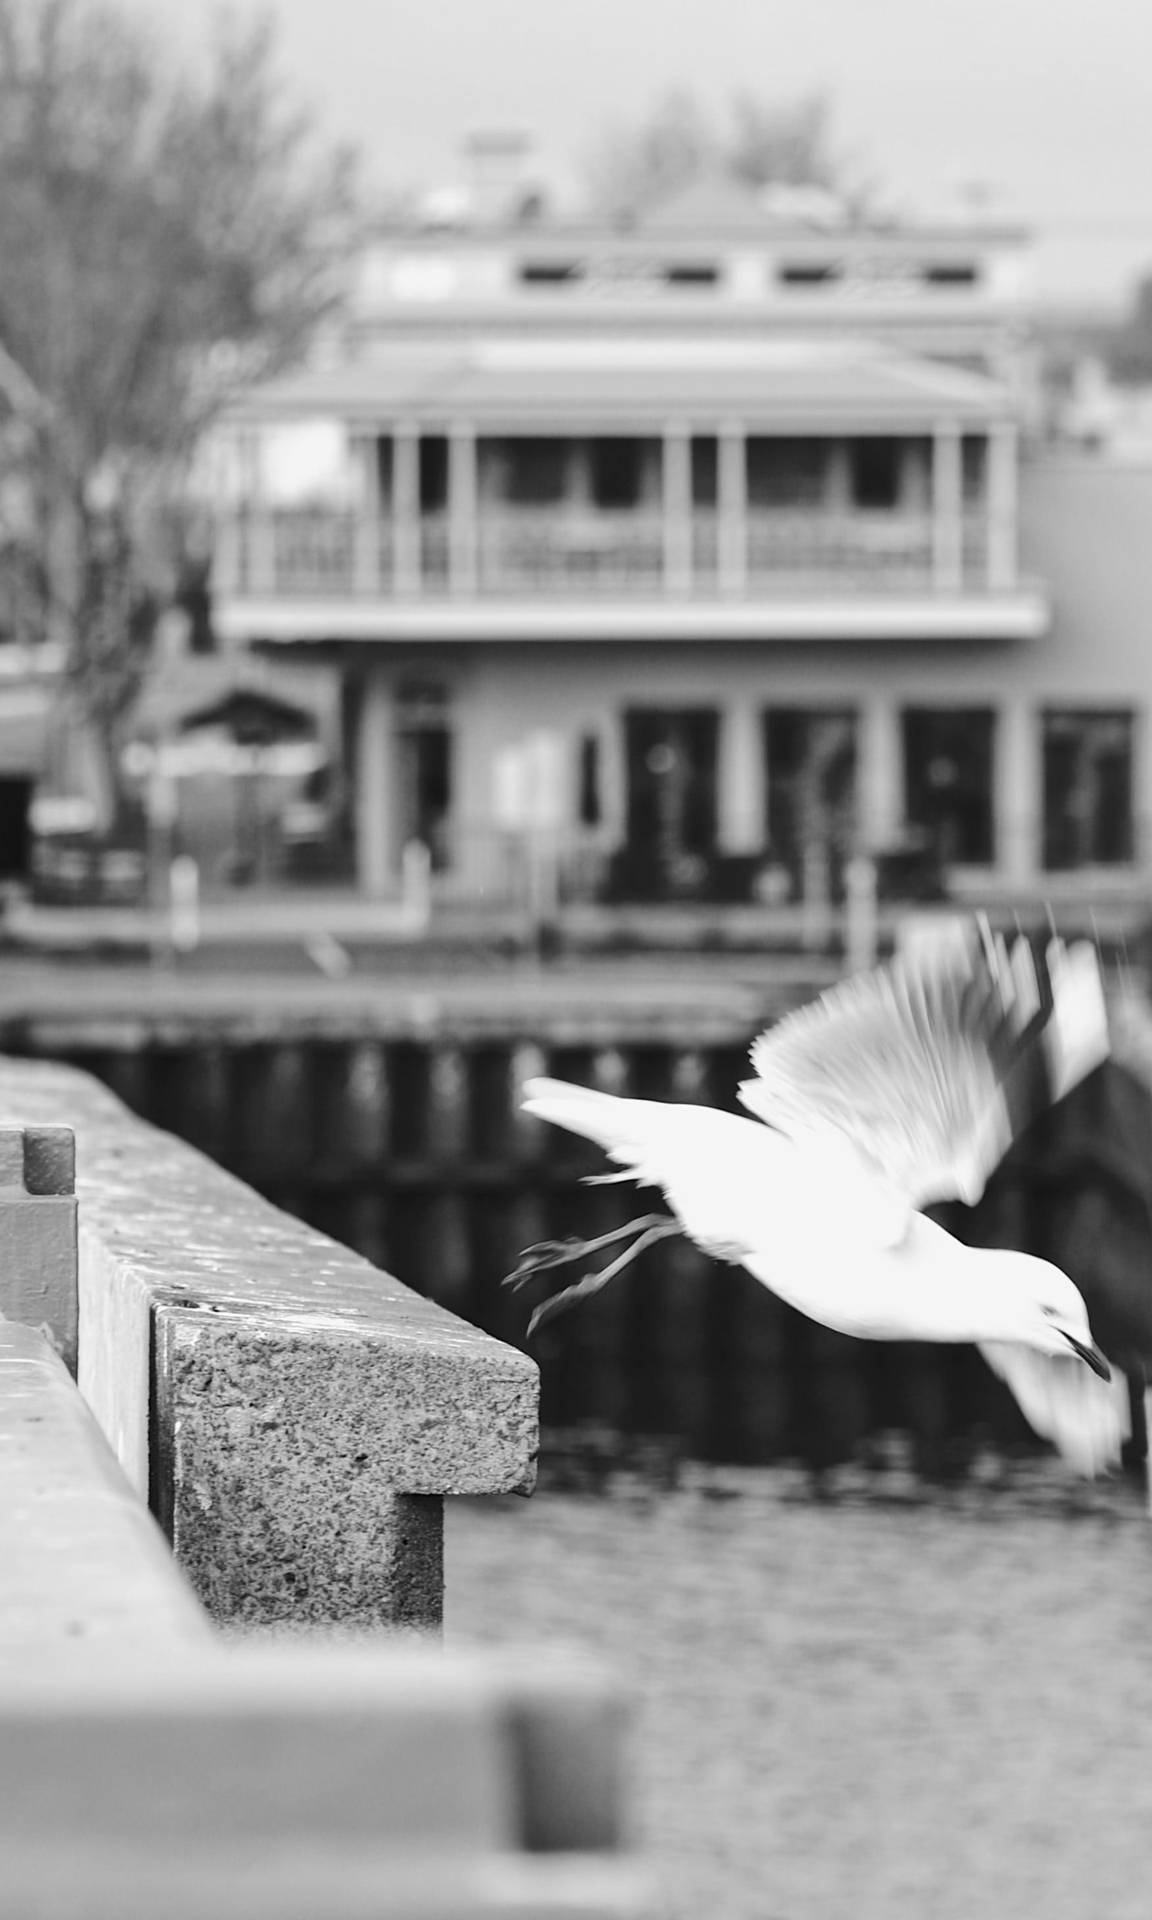 Vibrant Life In Adelaide Spotlighted By A Solitary Seagull In Grayscale. Background